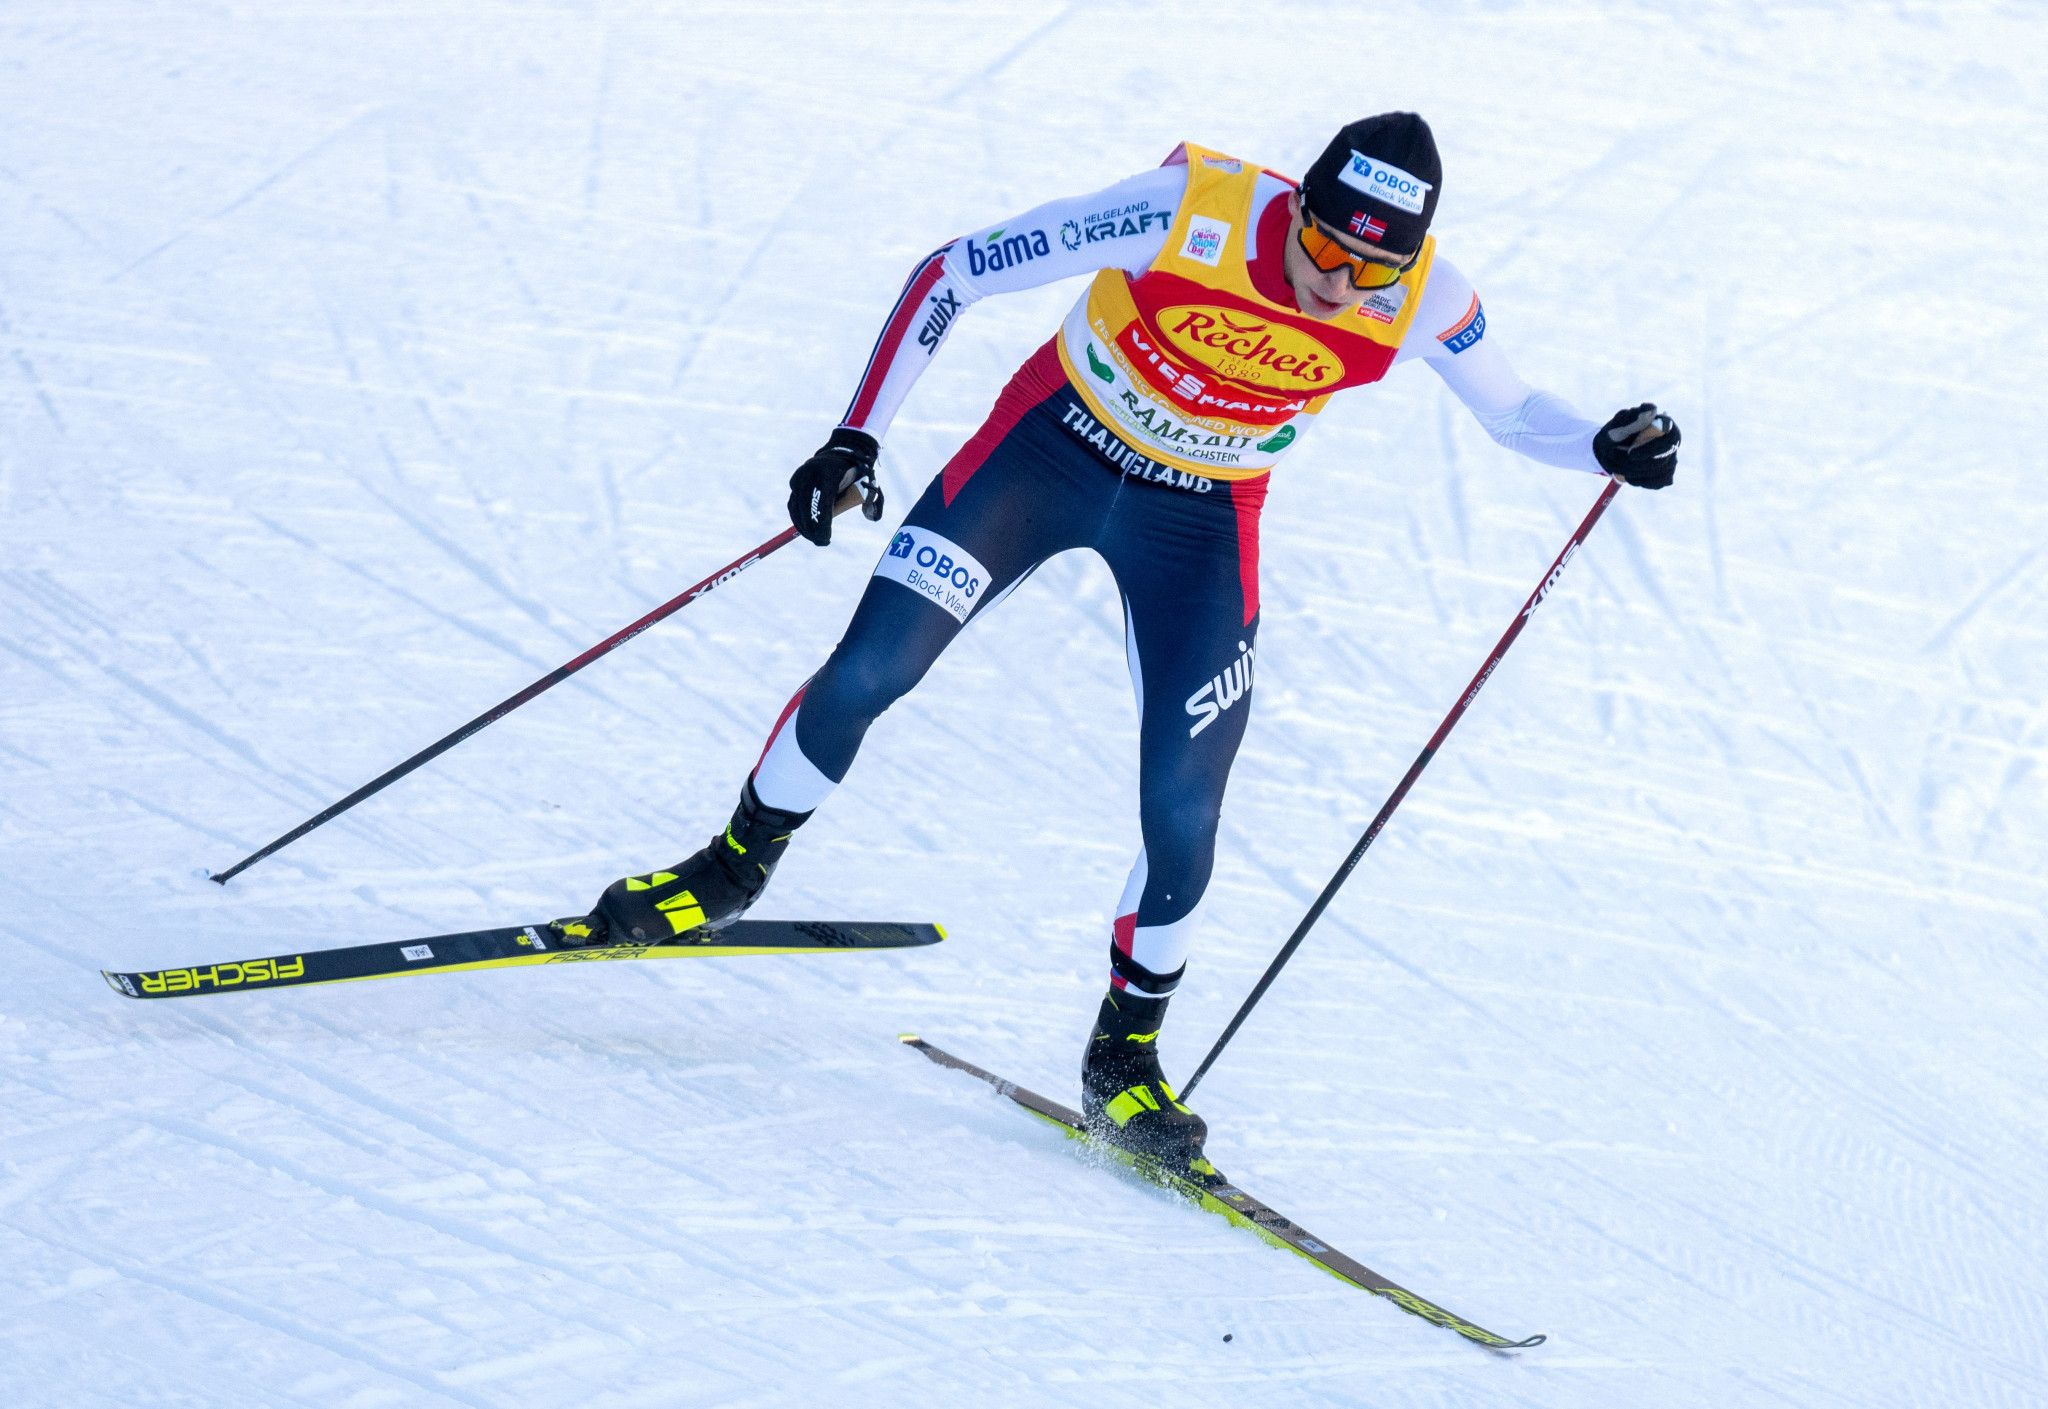 Riiber reigns supreme in Ramsau with yet another Nordic Combined World Cup win